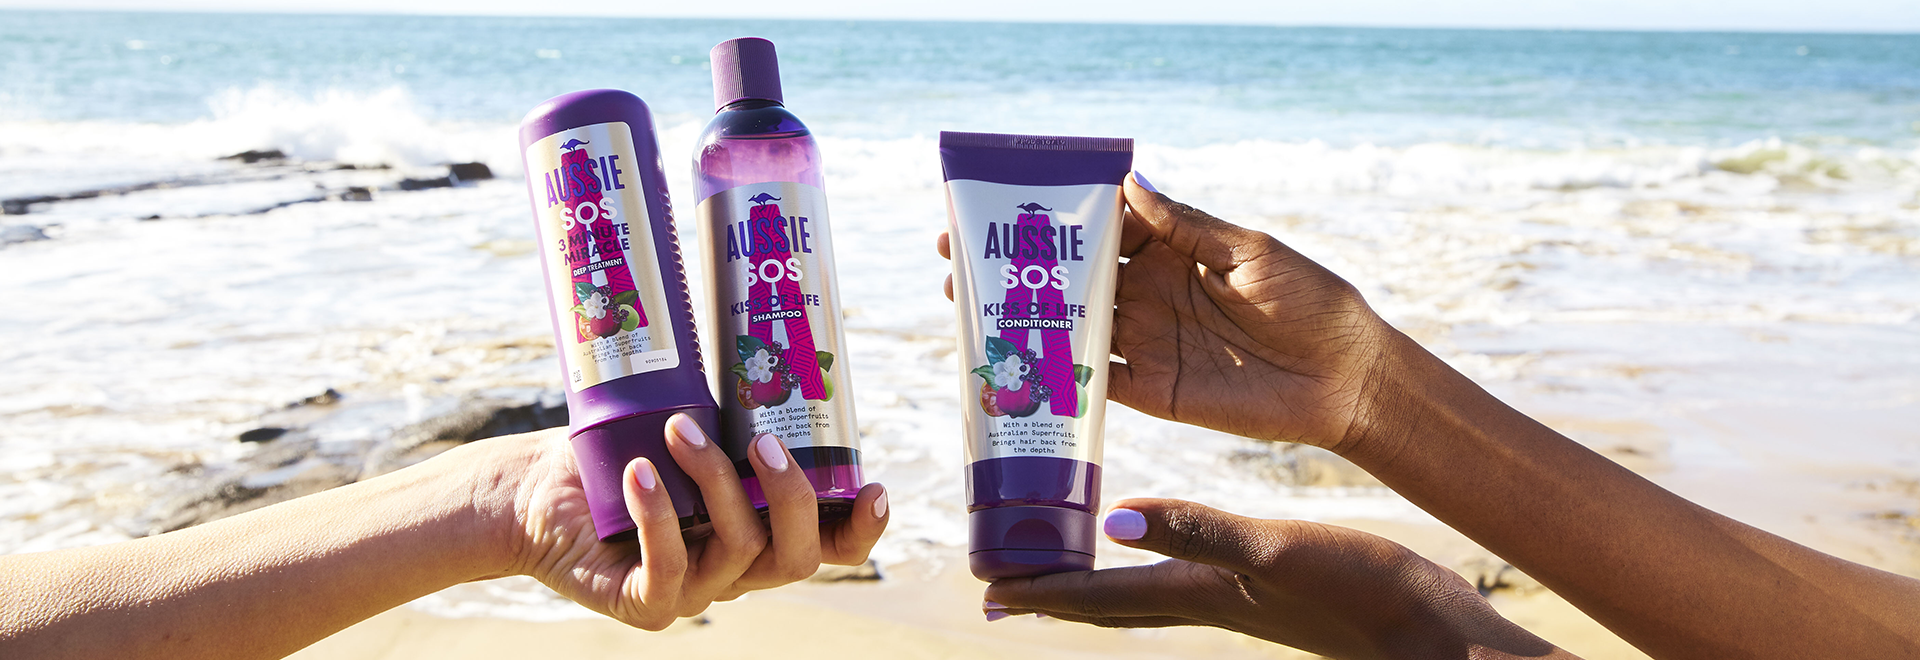 A photo of Aussie SOS Kiss of Life products holded in hands on the beach environment 